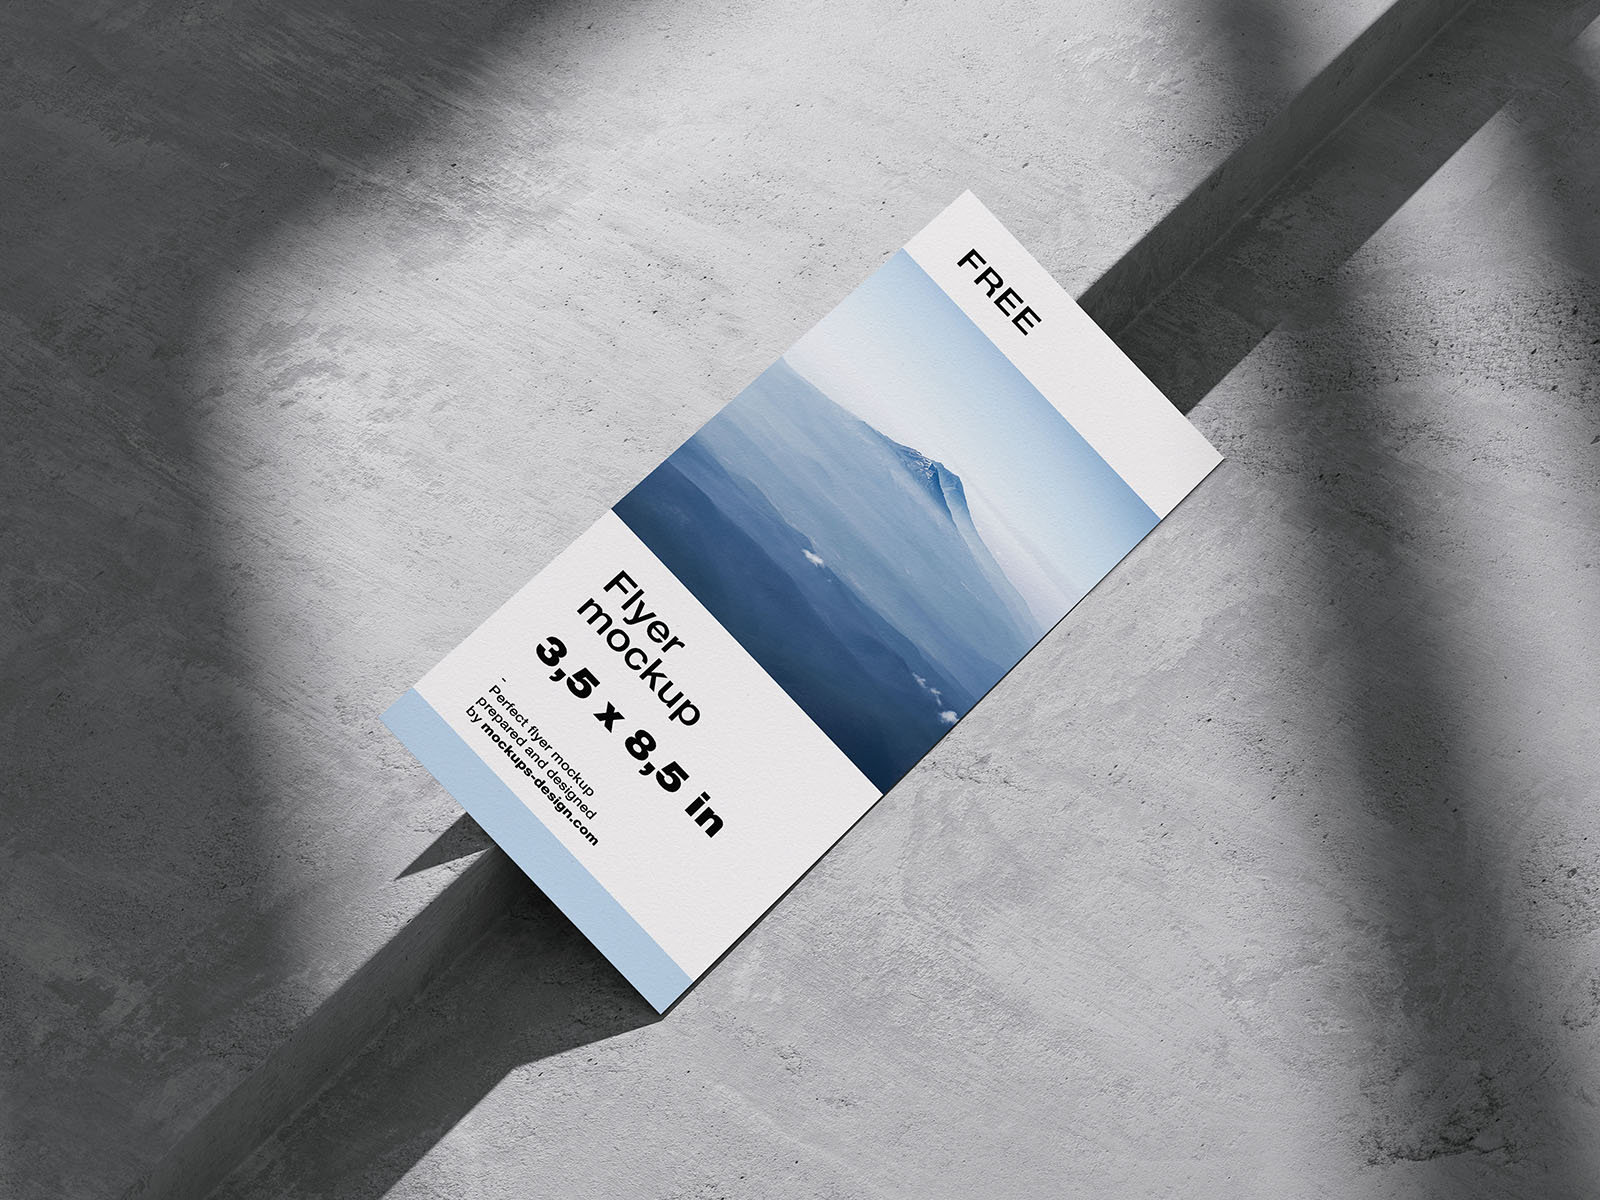 5 Mockups of 35 X 85 Flyer on Concrete FREE PSD